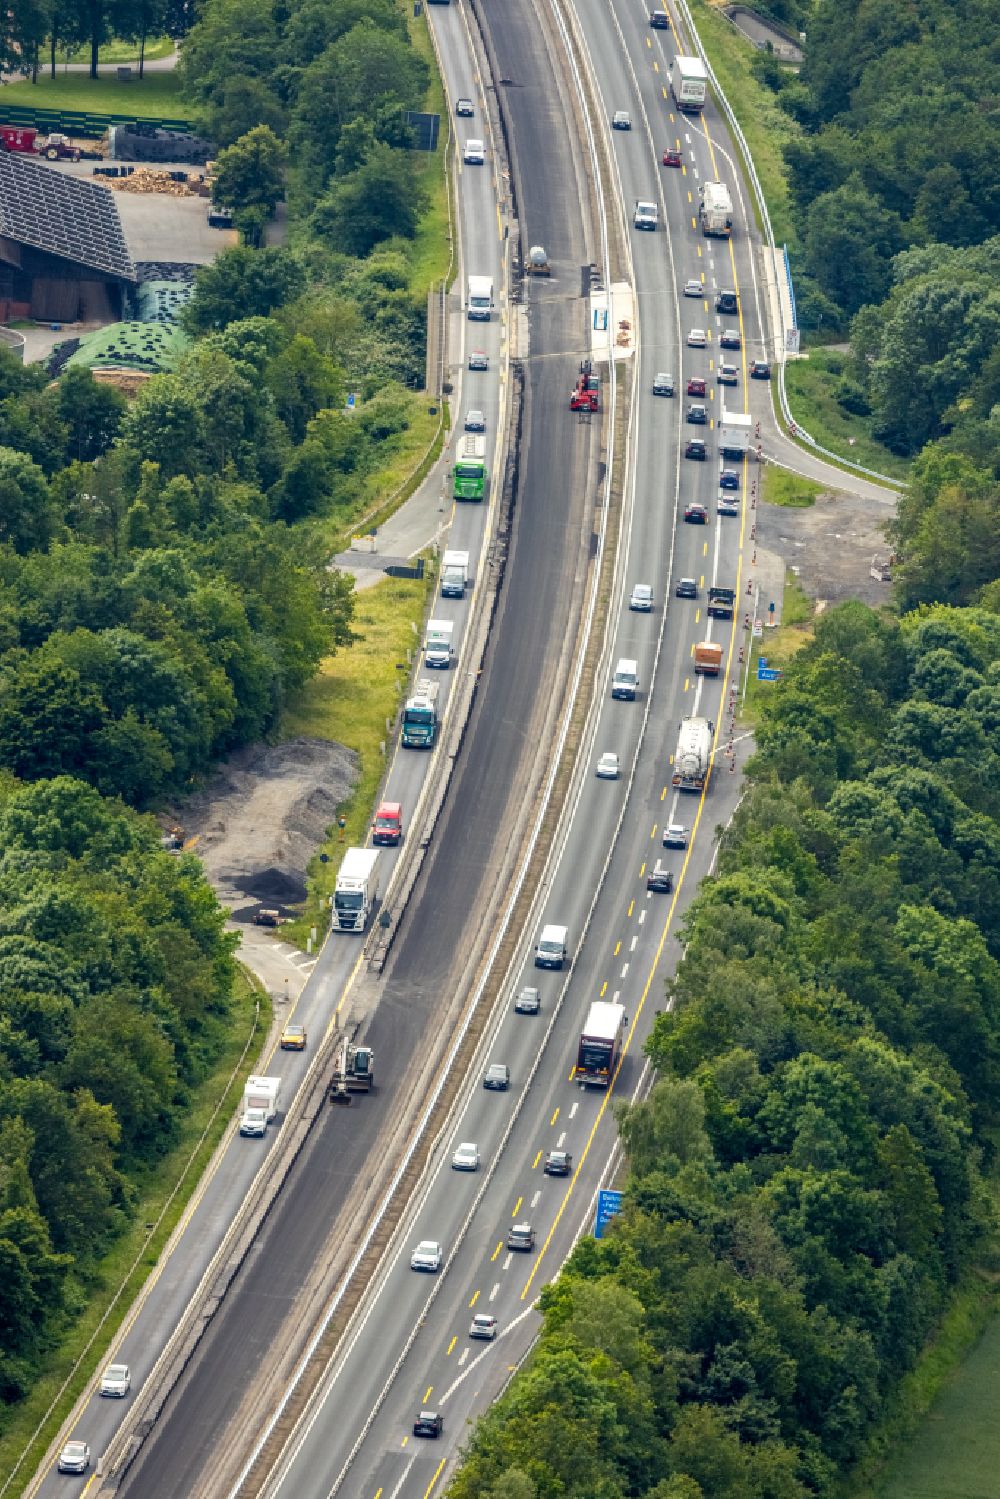 Dorsten from the bird's eye view: Motorway congestion along the route of the lanes BAB A31 in the district Oestrich in Dorsten at Ruhrgebiet in the state North Rhine-Westphalia, Germany